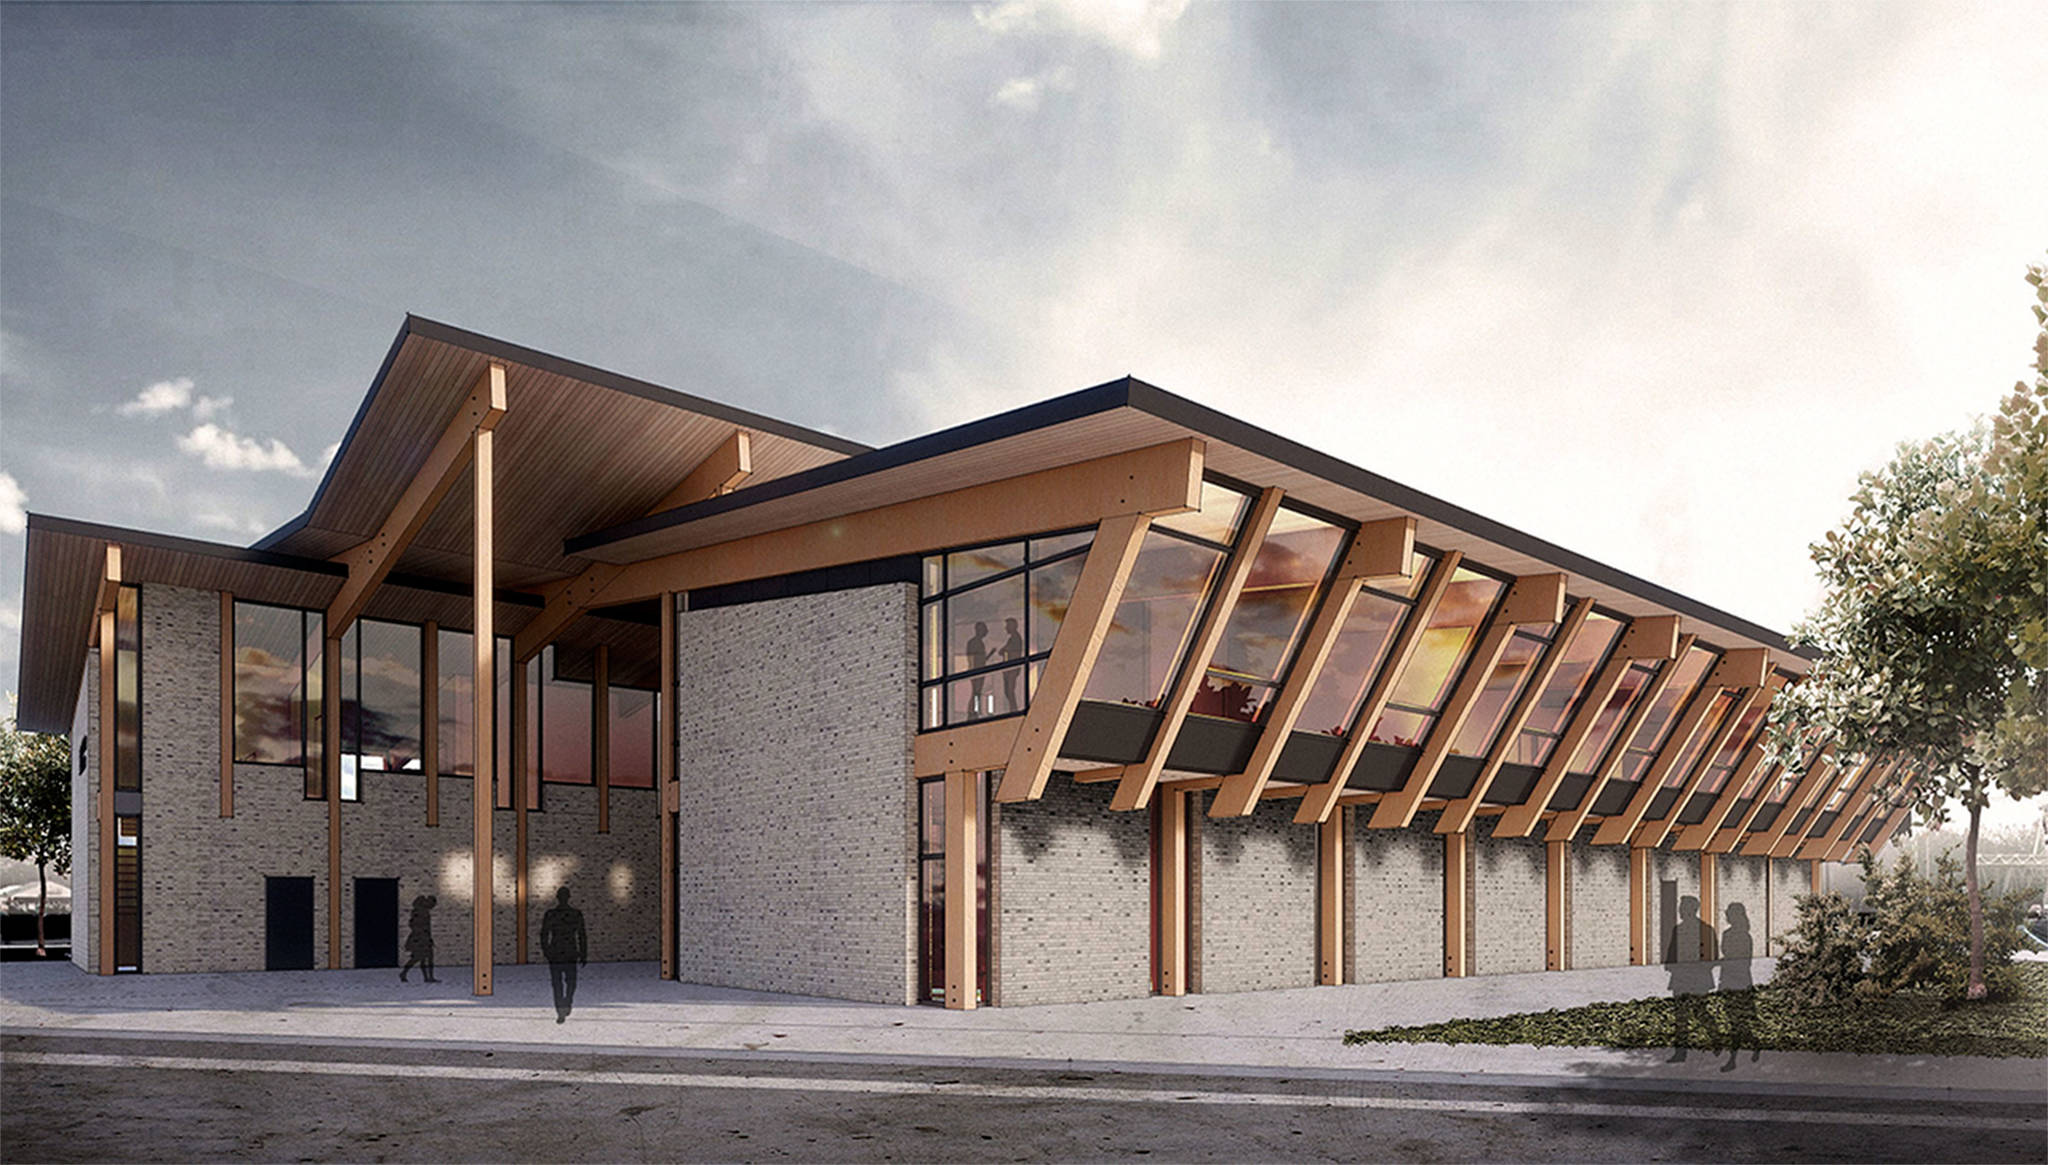 (Courtesy Ben Franz-Knight) A new rendering for the planned Gateway Center in Aberdeen.